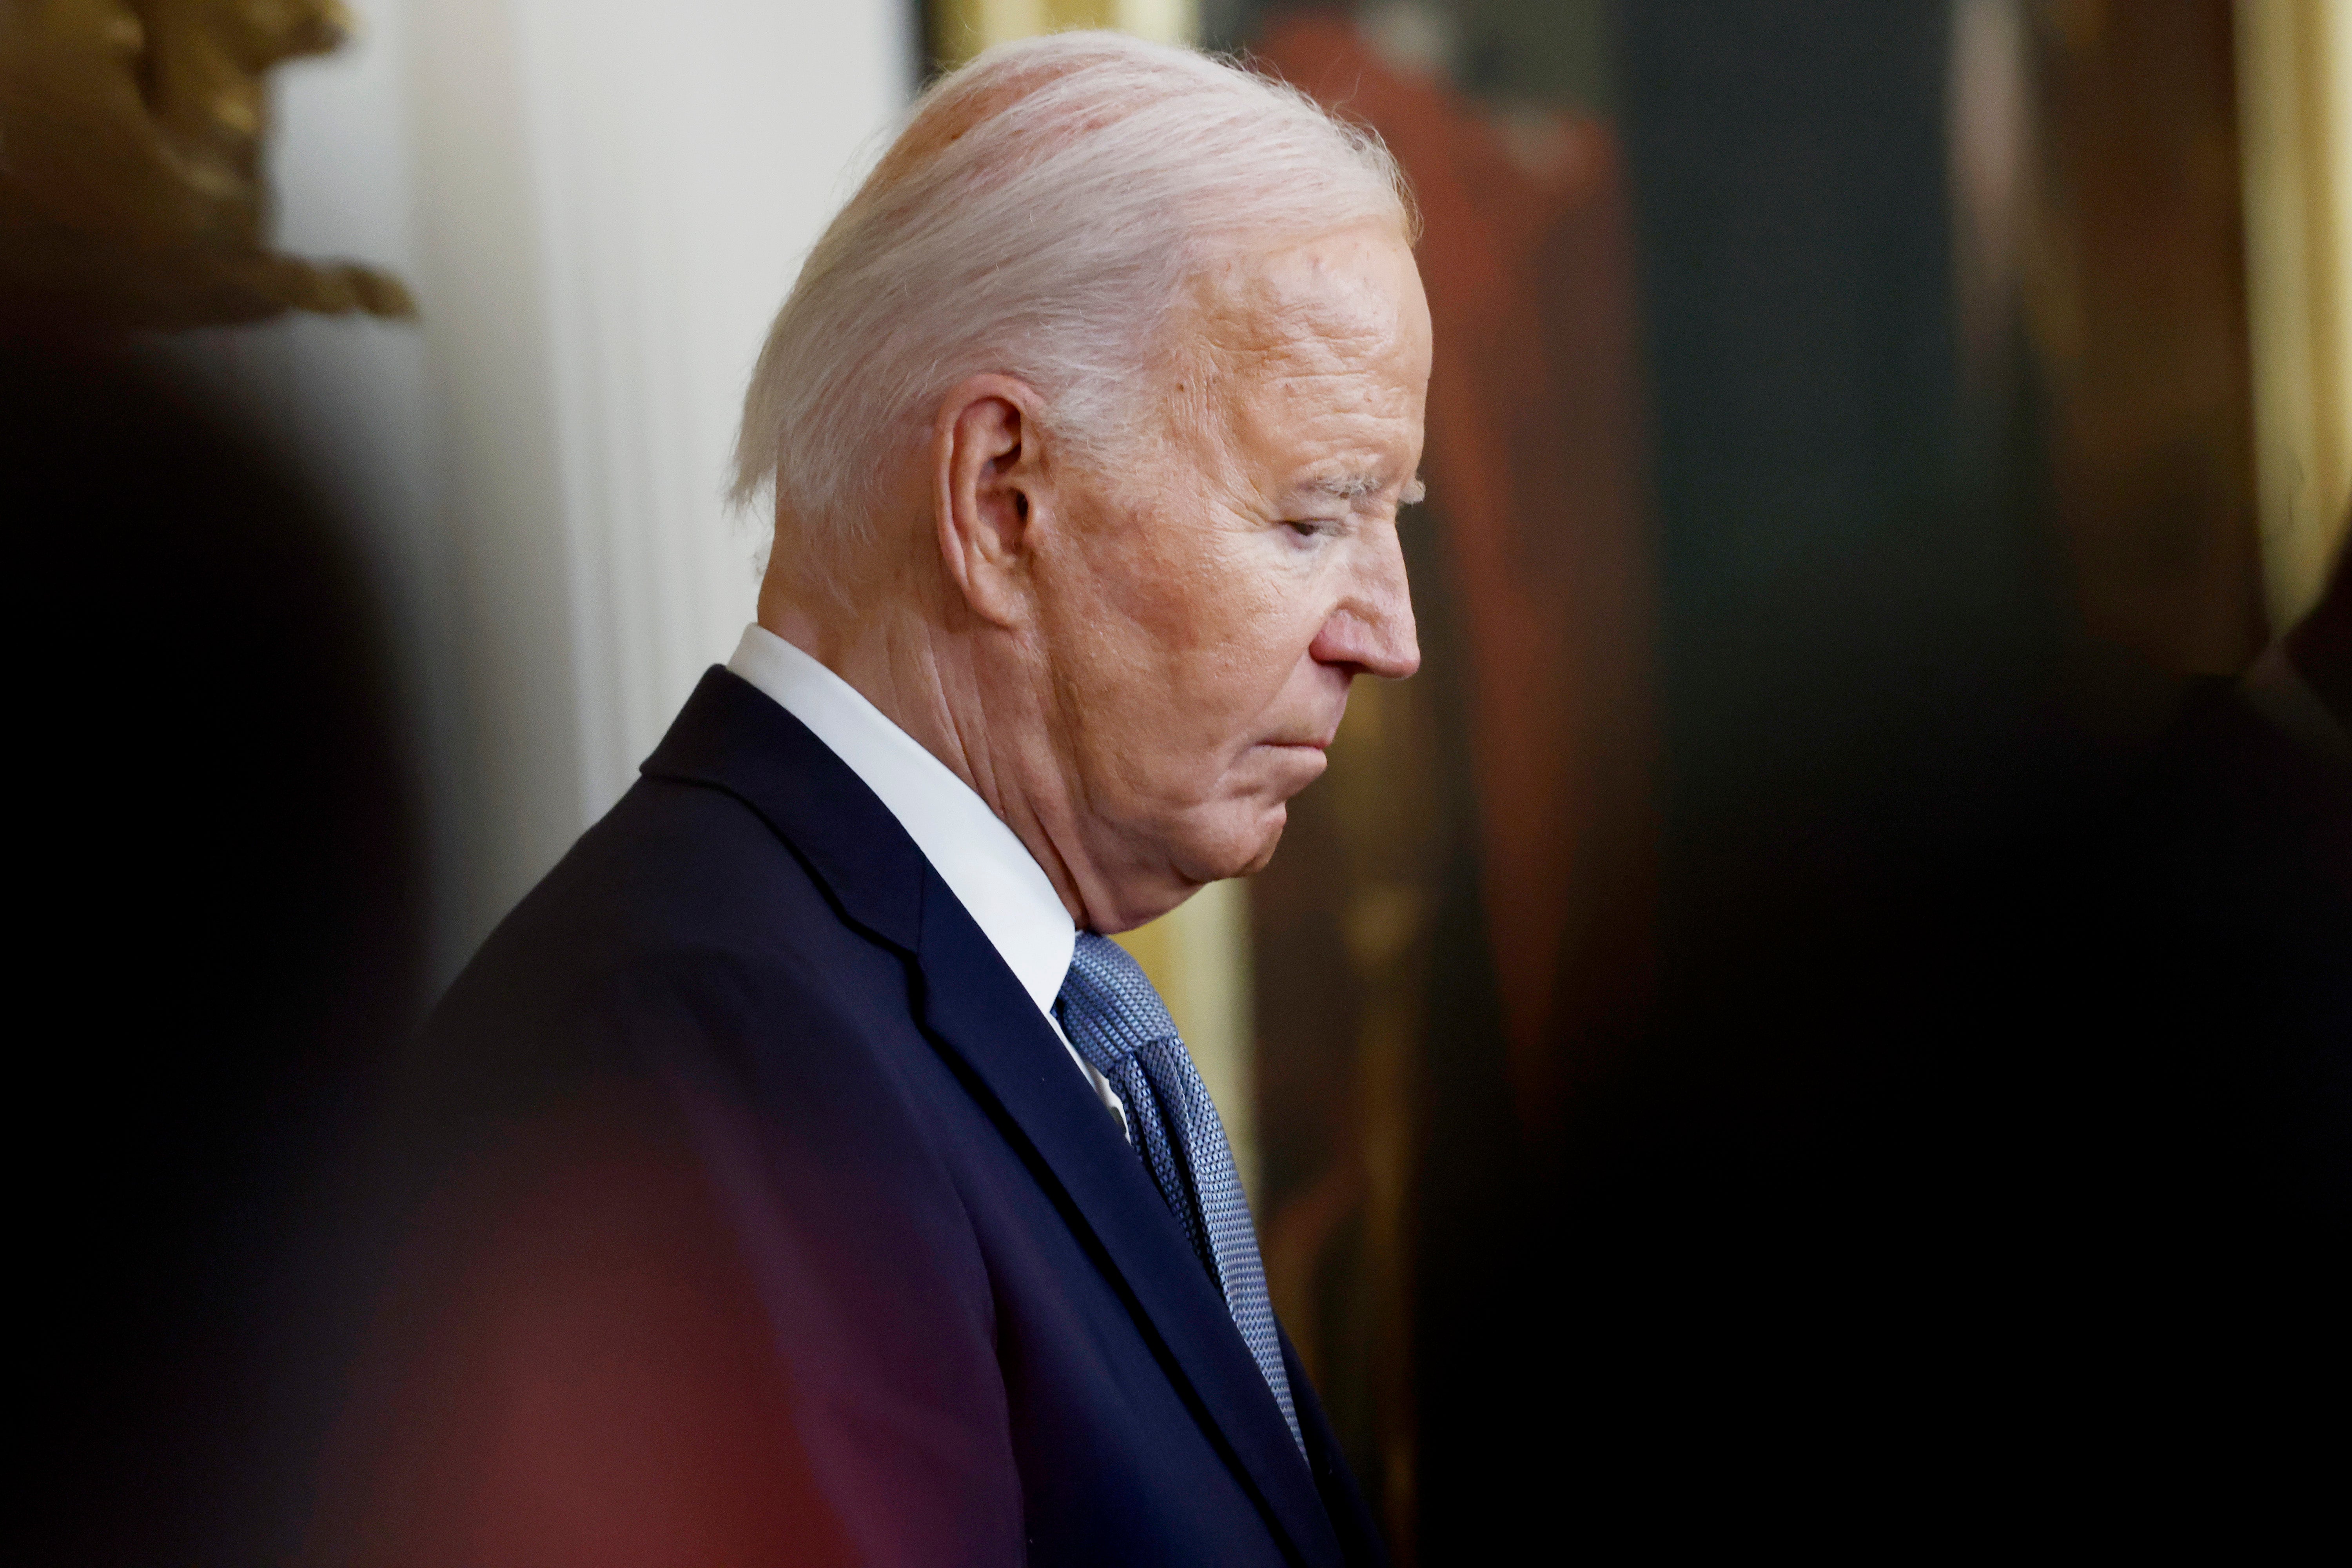 President Joe Biden appears at Medal of Honor ceremony at the White House on July 3.